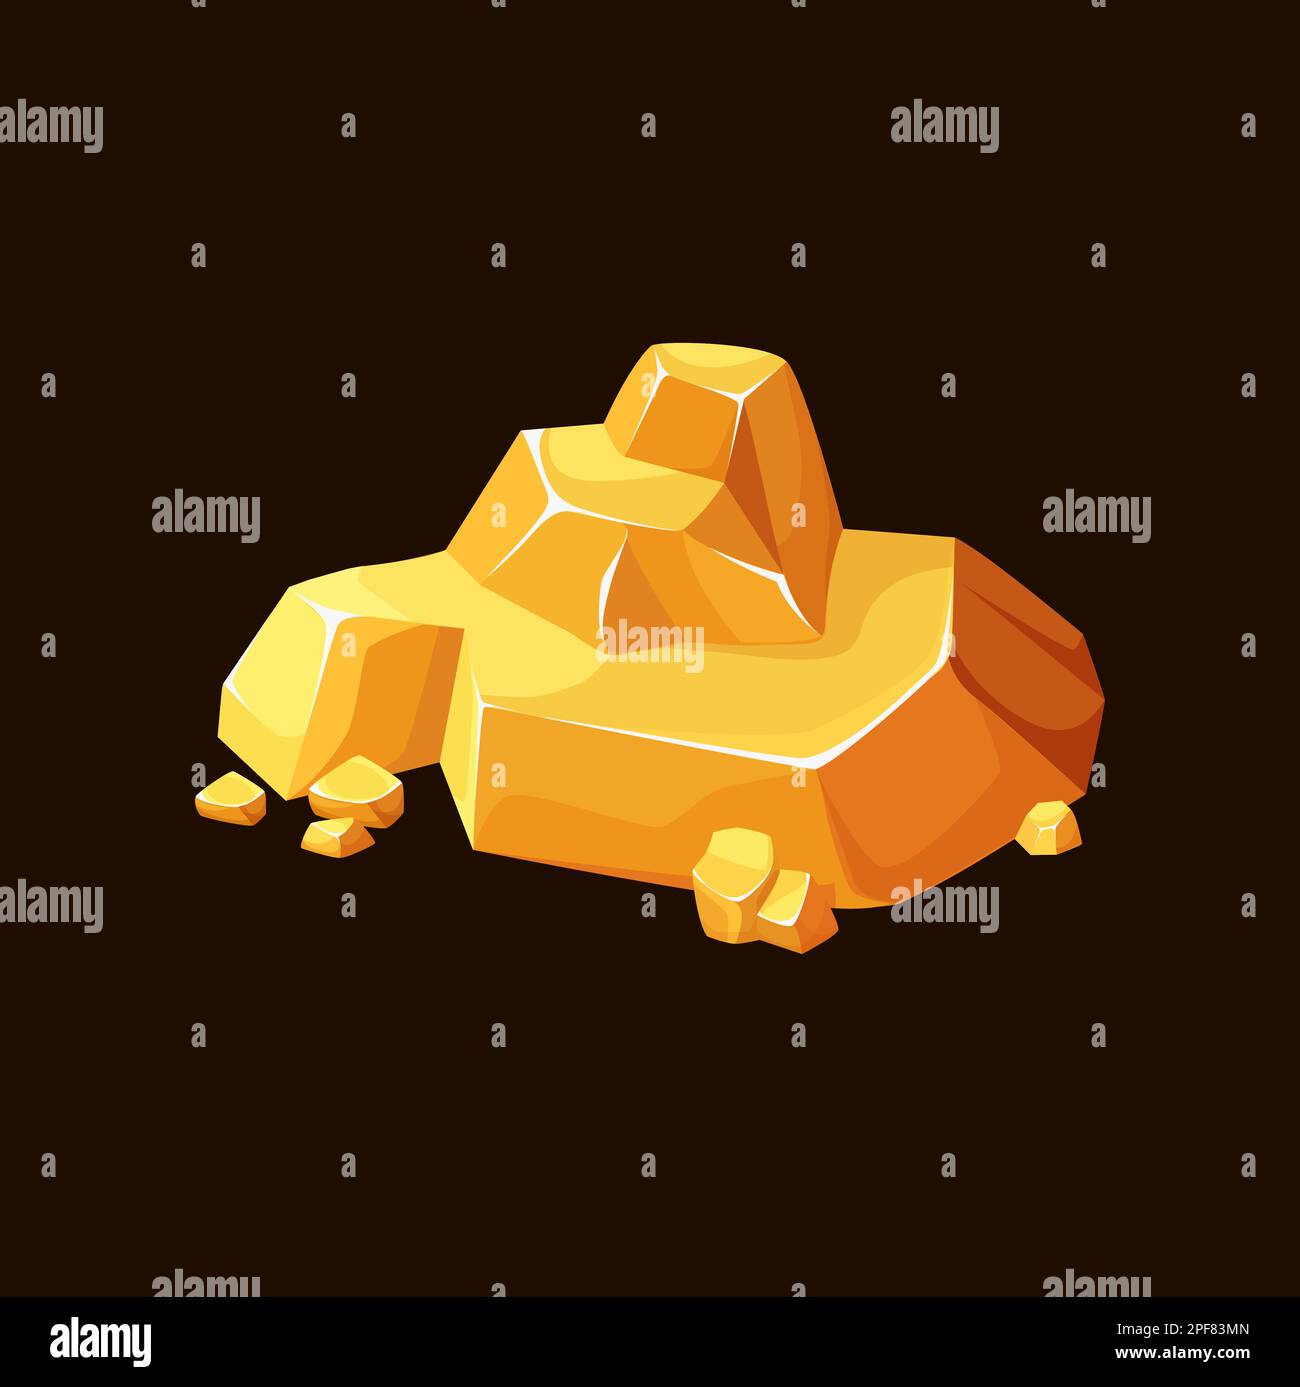 Free Vector  Mining game icons